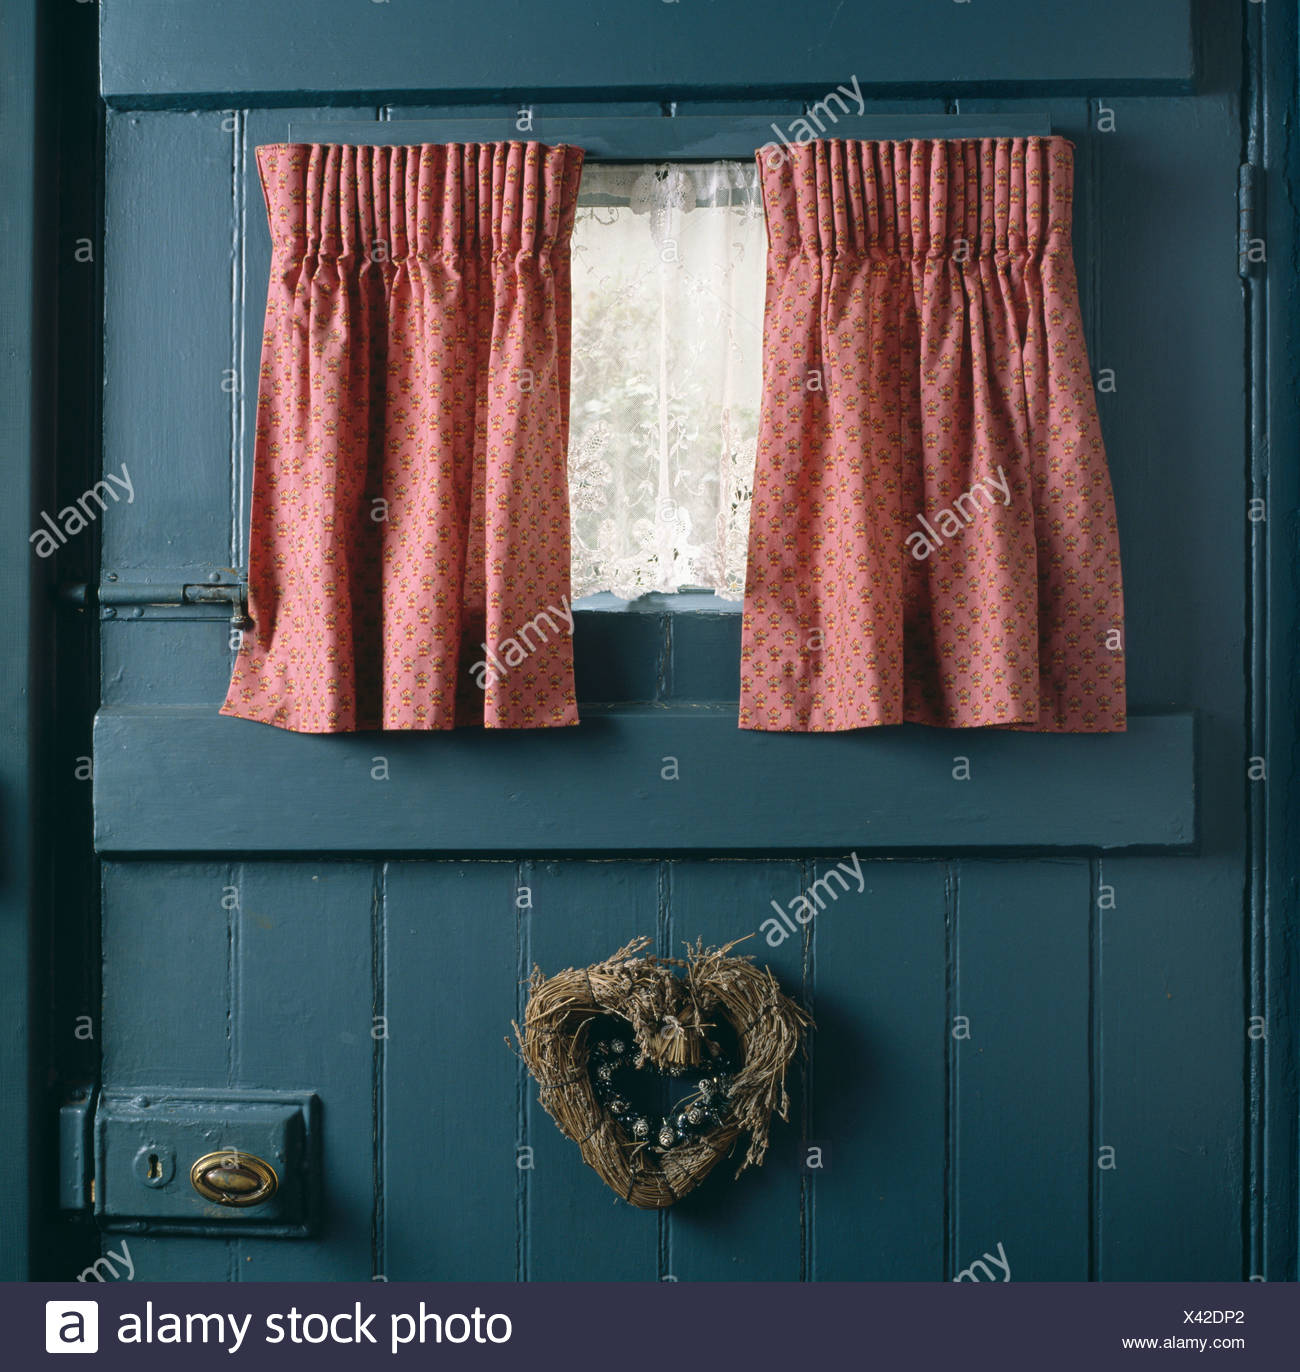 Close Up Of Pink Curtains And White Lace Curtain At Small